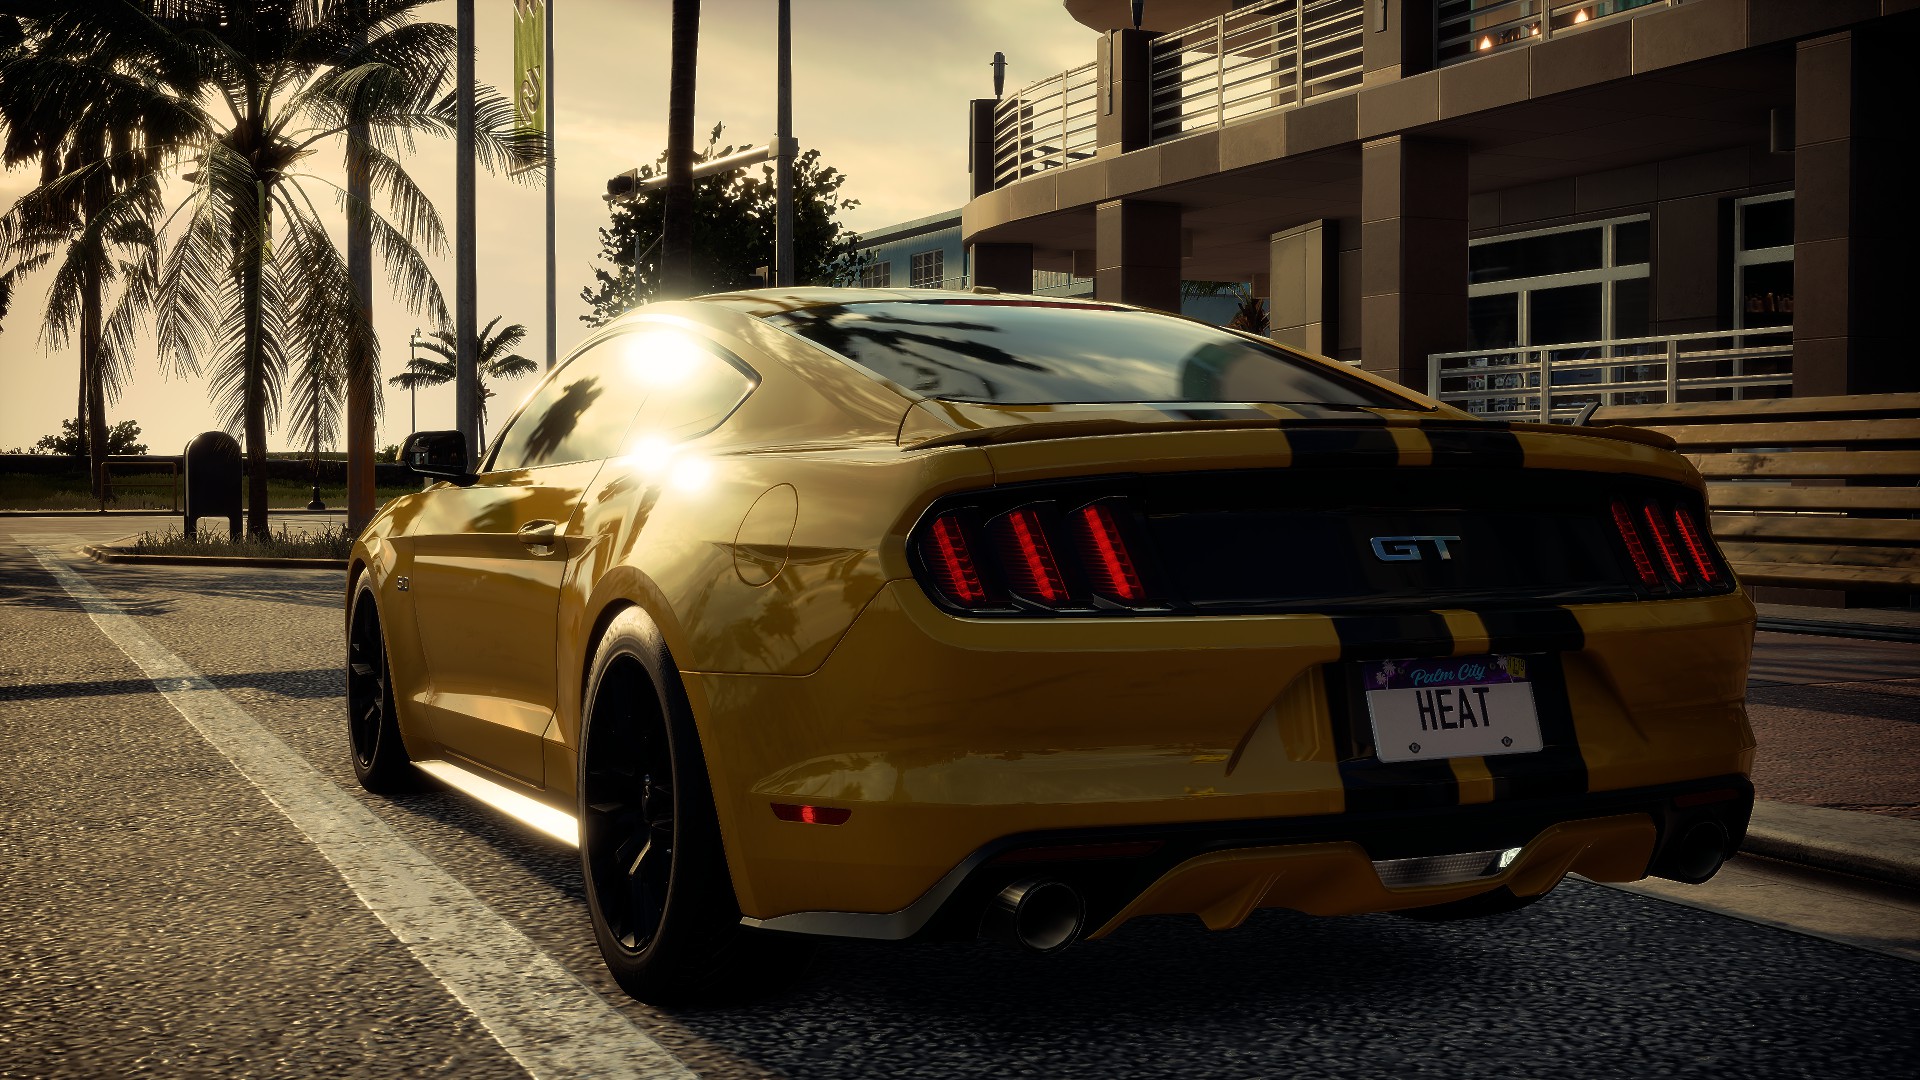 General 1920x1080 Ford Mustang muscle cars Need for Speed: Heat 4K street view city palm trees rear view taillights car Ford Mustang S550 Ford American cars video games Electronic Arts